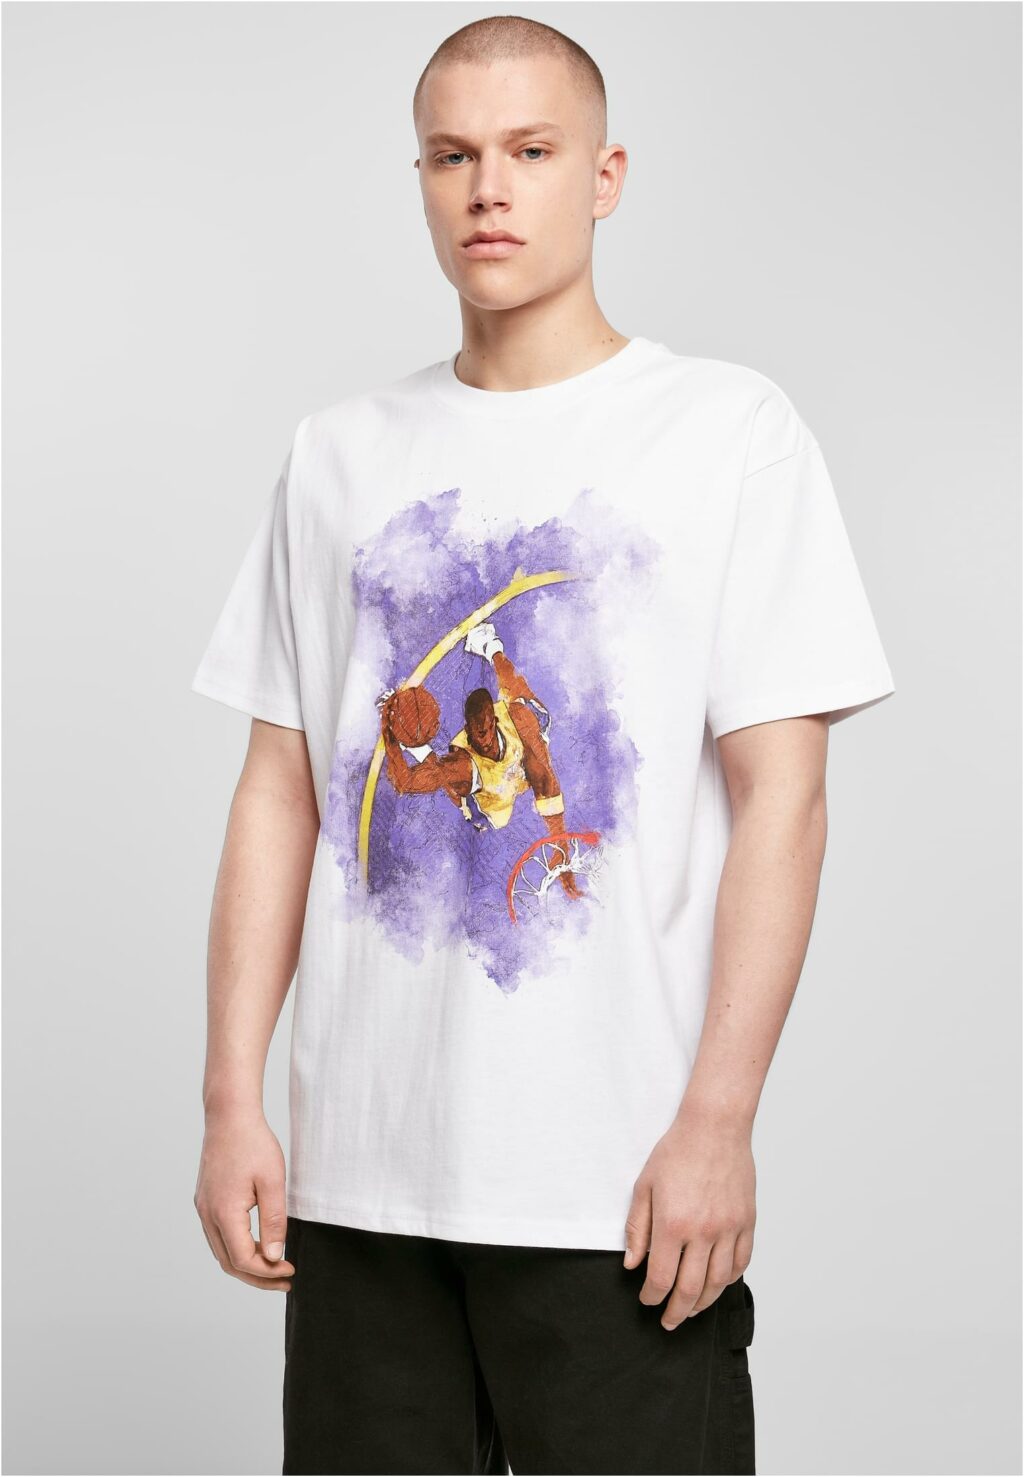 Basketball Clouds 2.0 Oversize Tee white MT1805